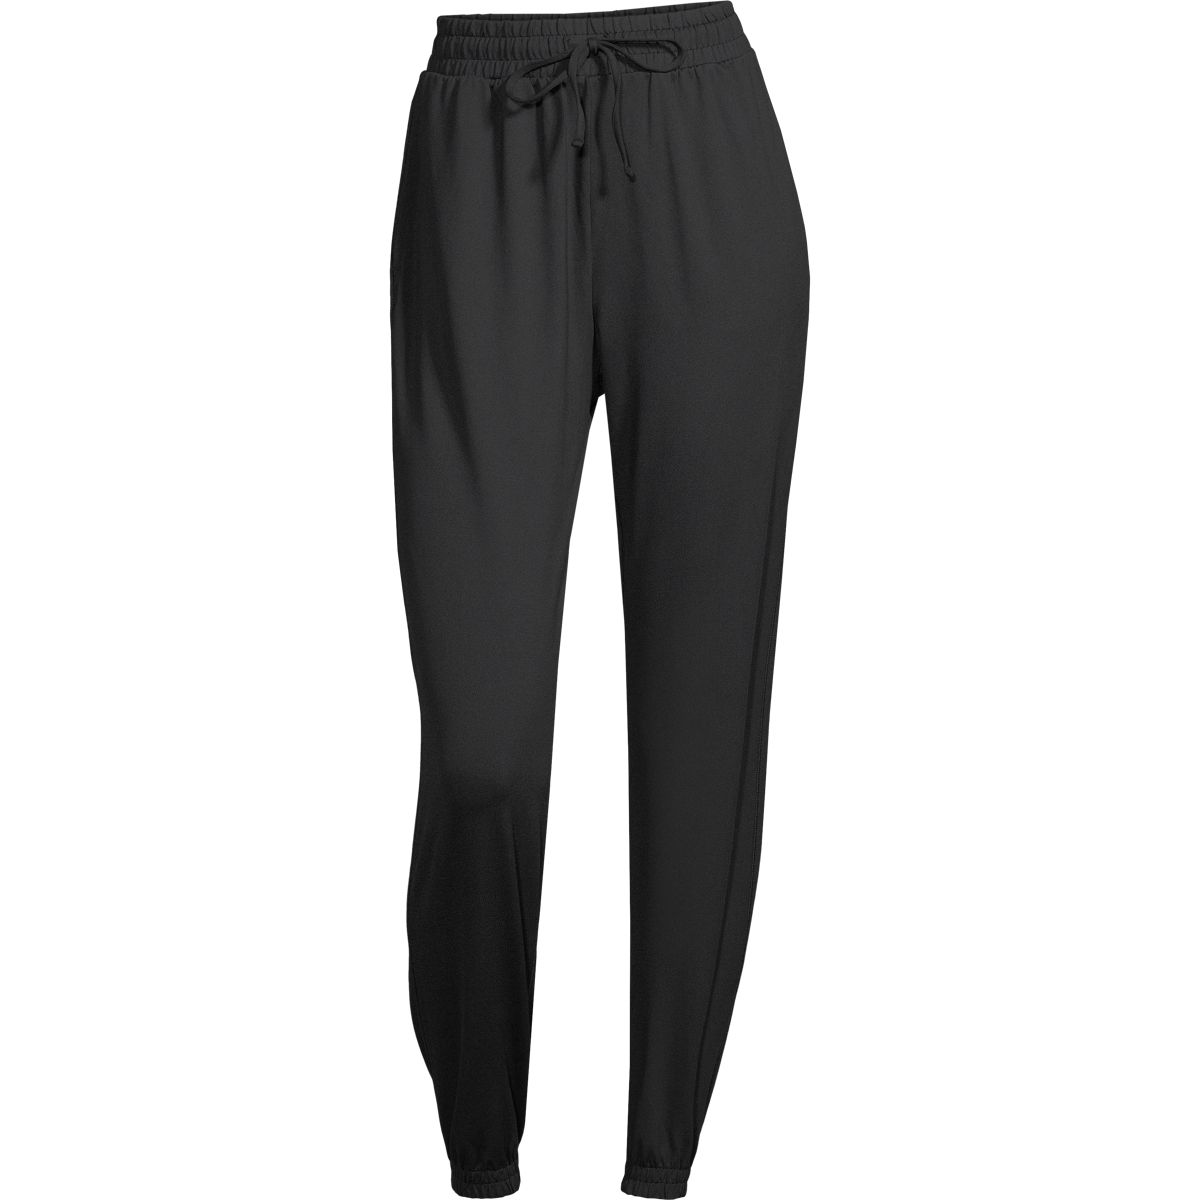 Girlfriend Collective Women's Reset Lounge Jogger Pants, Casual